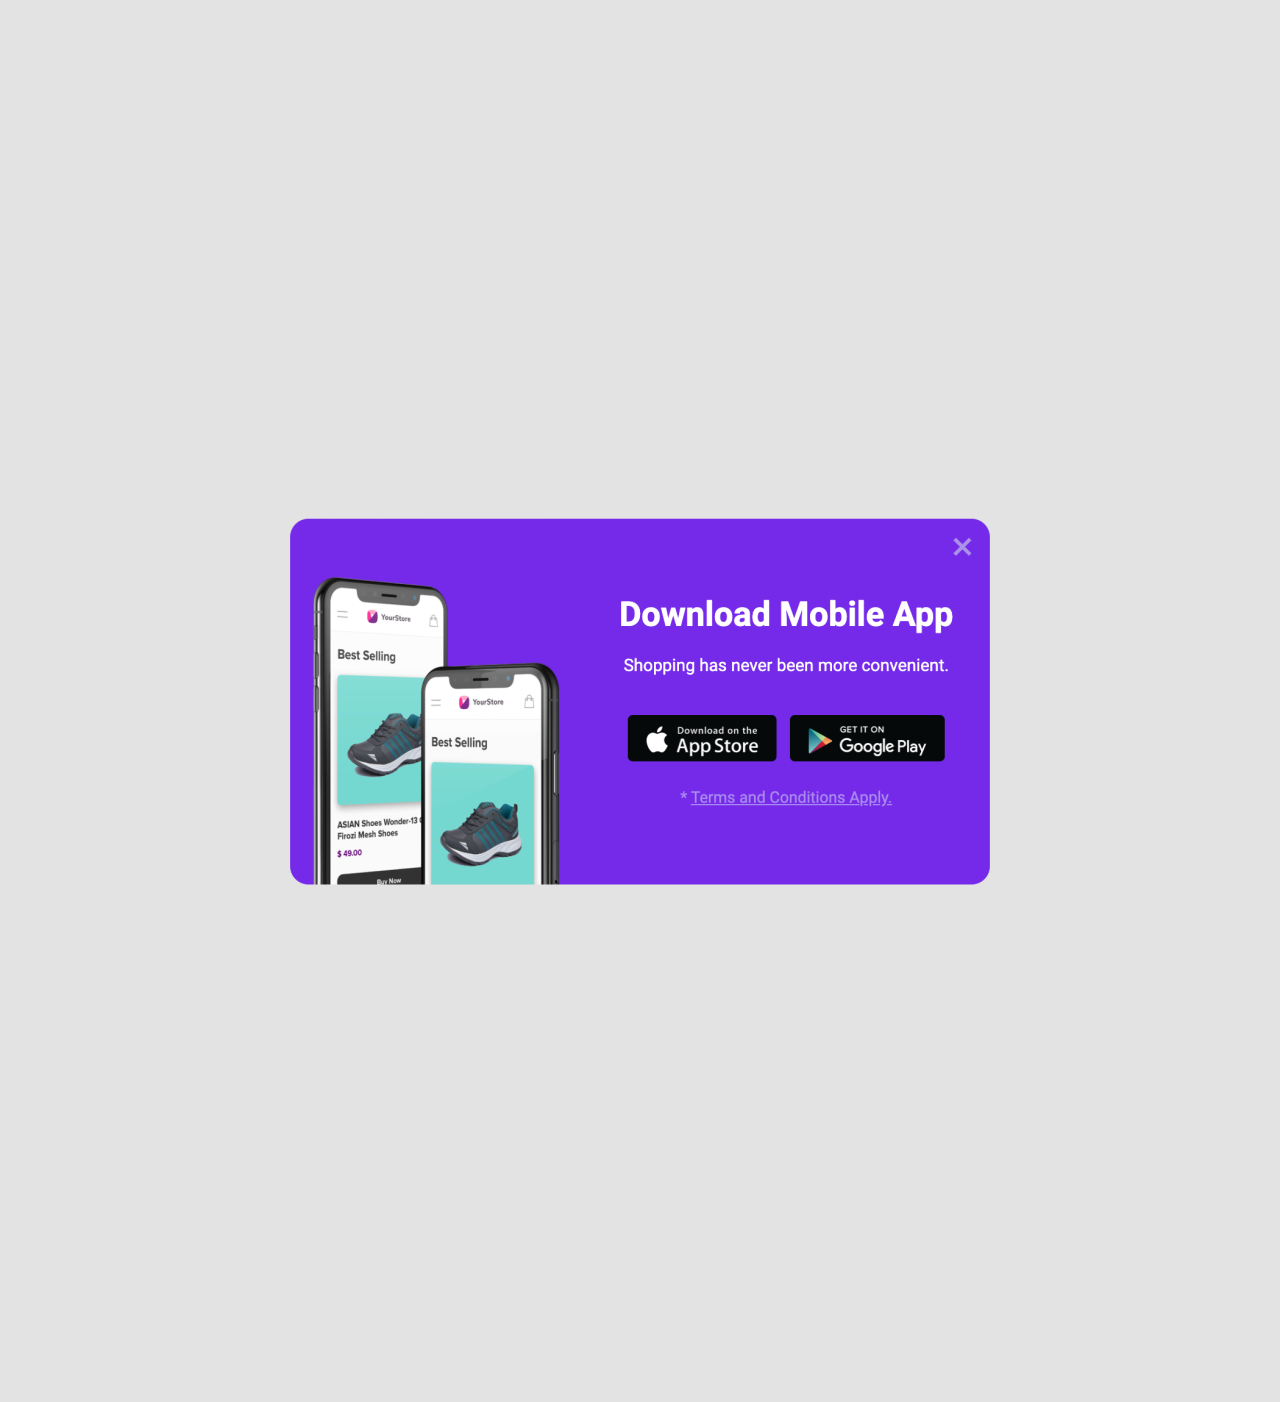 Mobile app pop-up template - Made by MailerLite